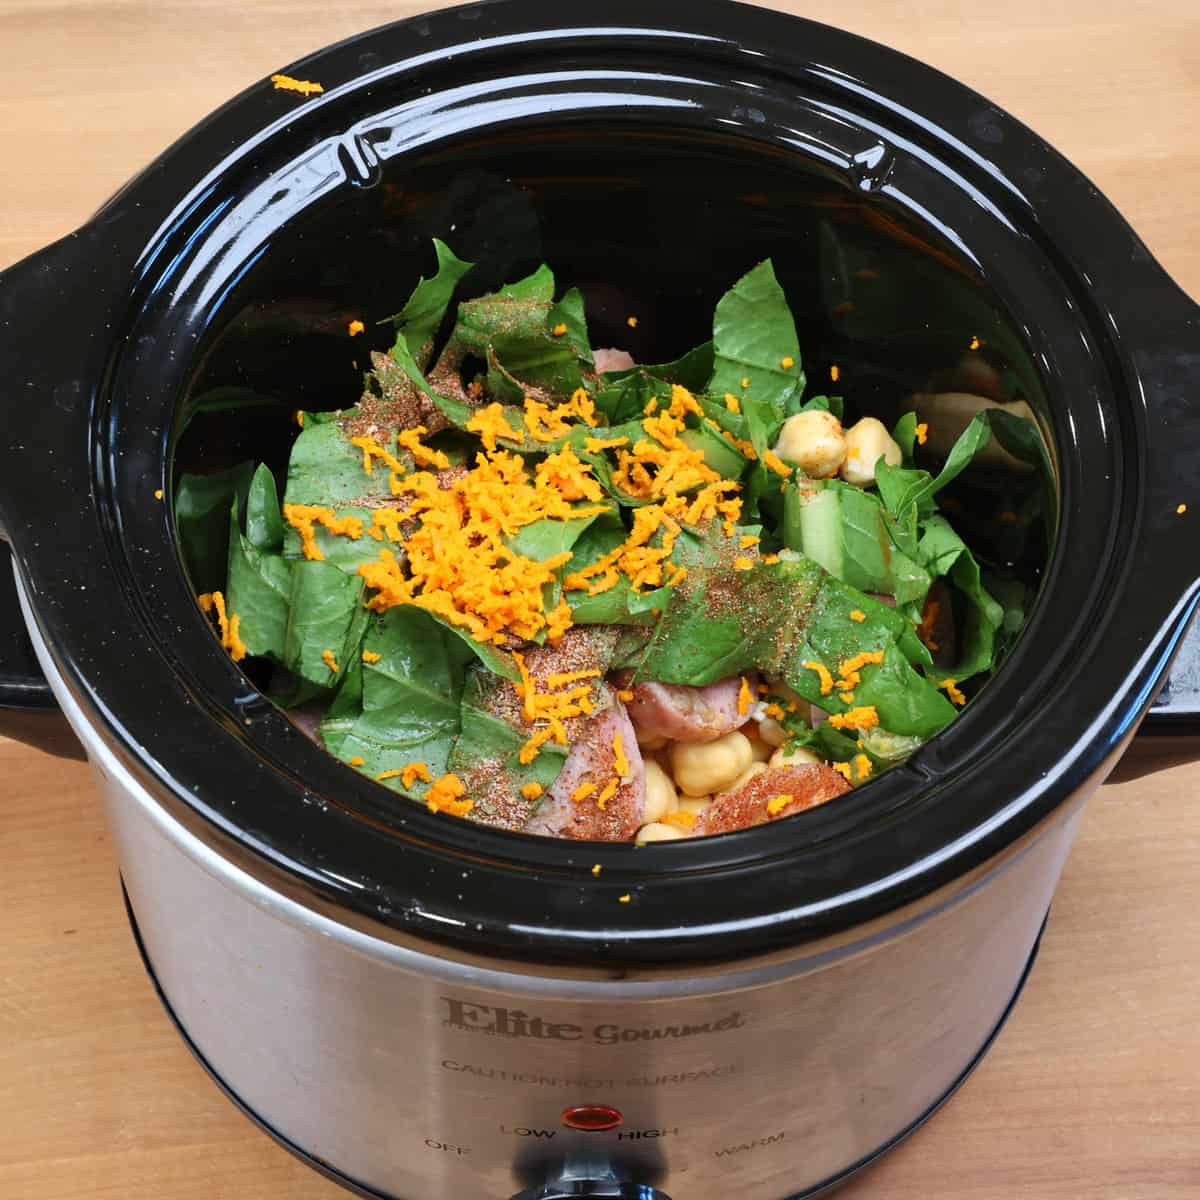 chickpeas, sausage, greens, seasonings, and turmeric in a small slow cooker.